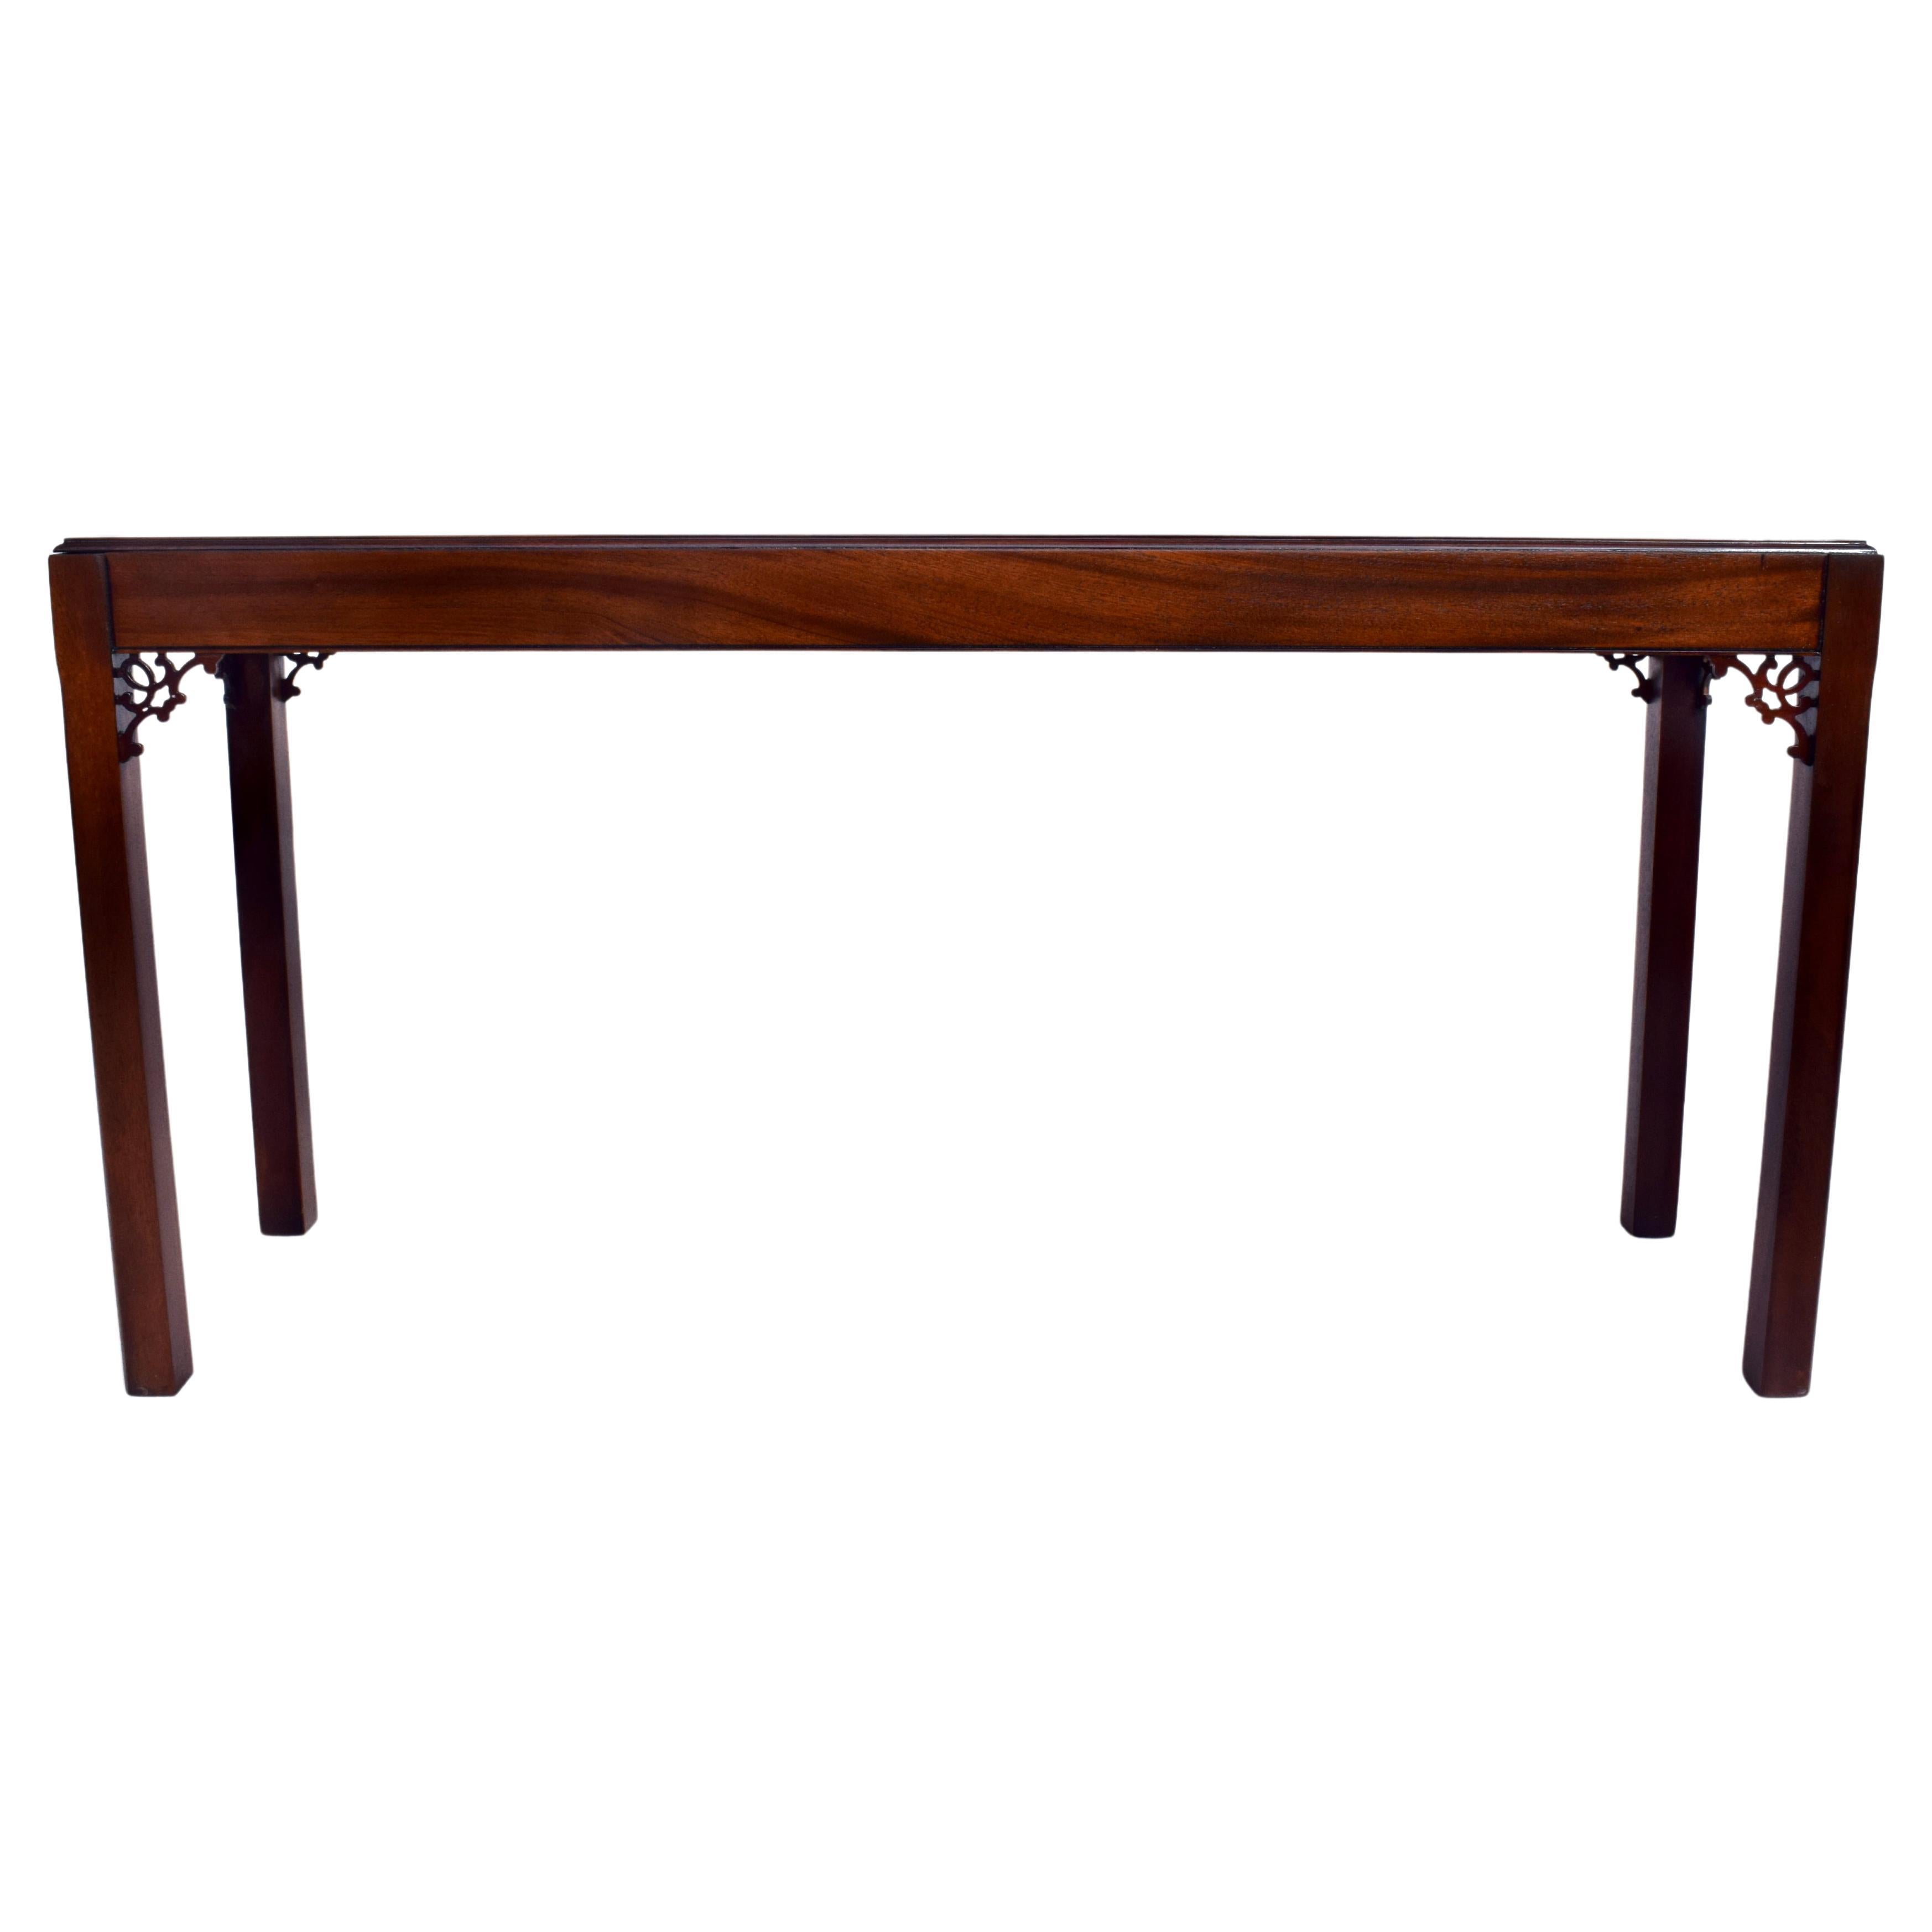 English Chippendale Mahogany Fret Work Console Table For Sale